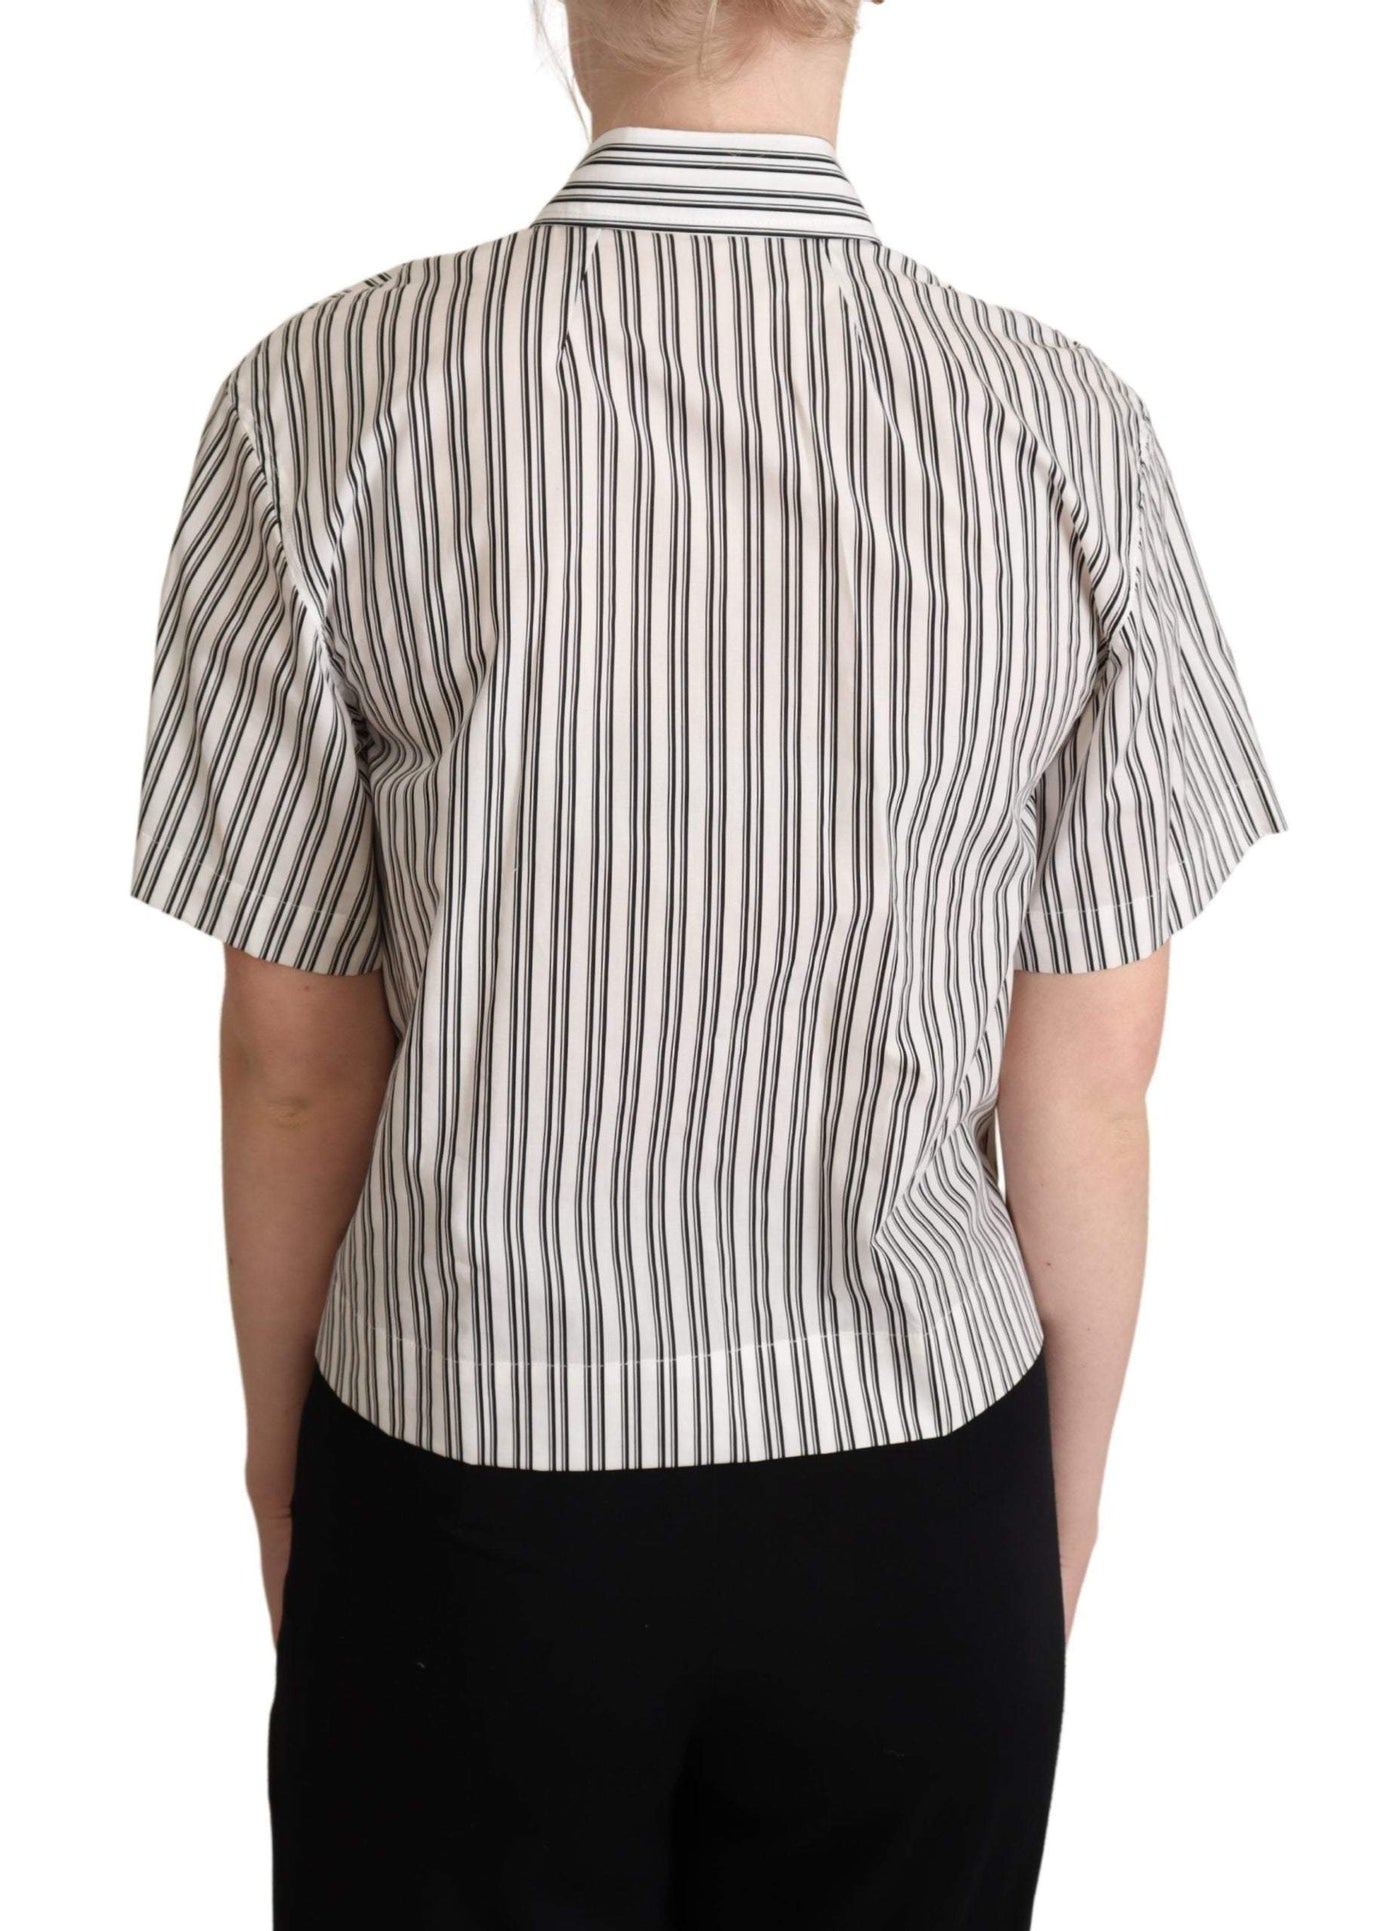 Dolce & Gabbana White Black Striped Shirt Blouse Top Black, Dolce & Gabbana, feed-agegroup-adult, feed-color-Black, feed-gender-female, IT40|S, IT42|M, IT44|L, Shirts - Women - Clothing at SEYMAYKA